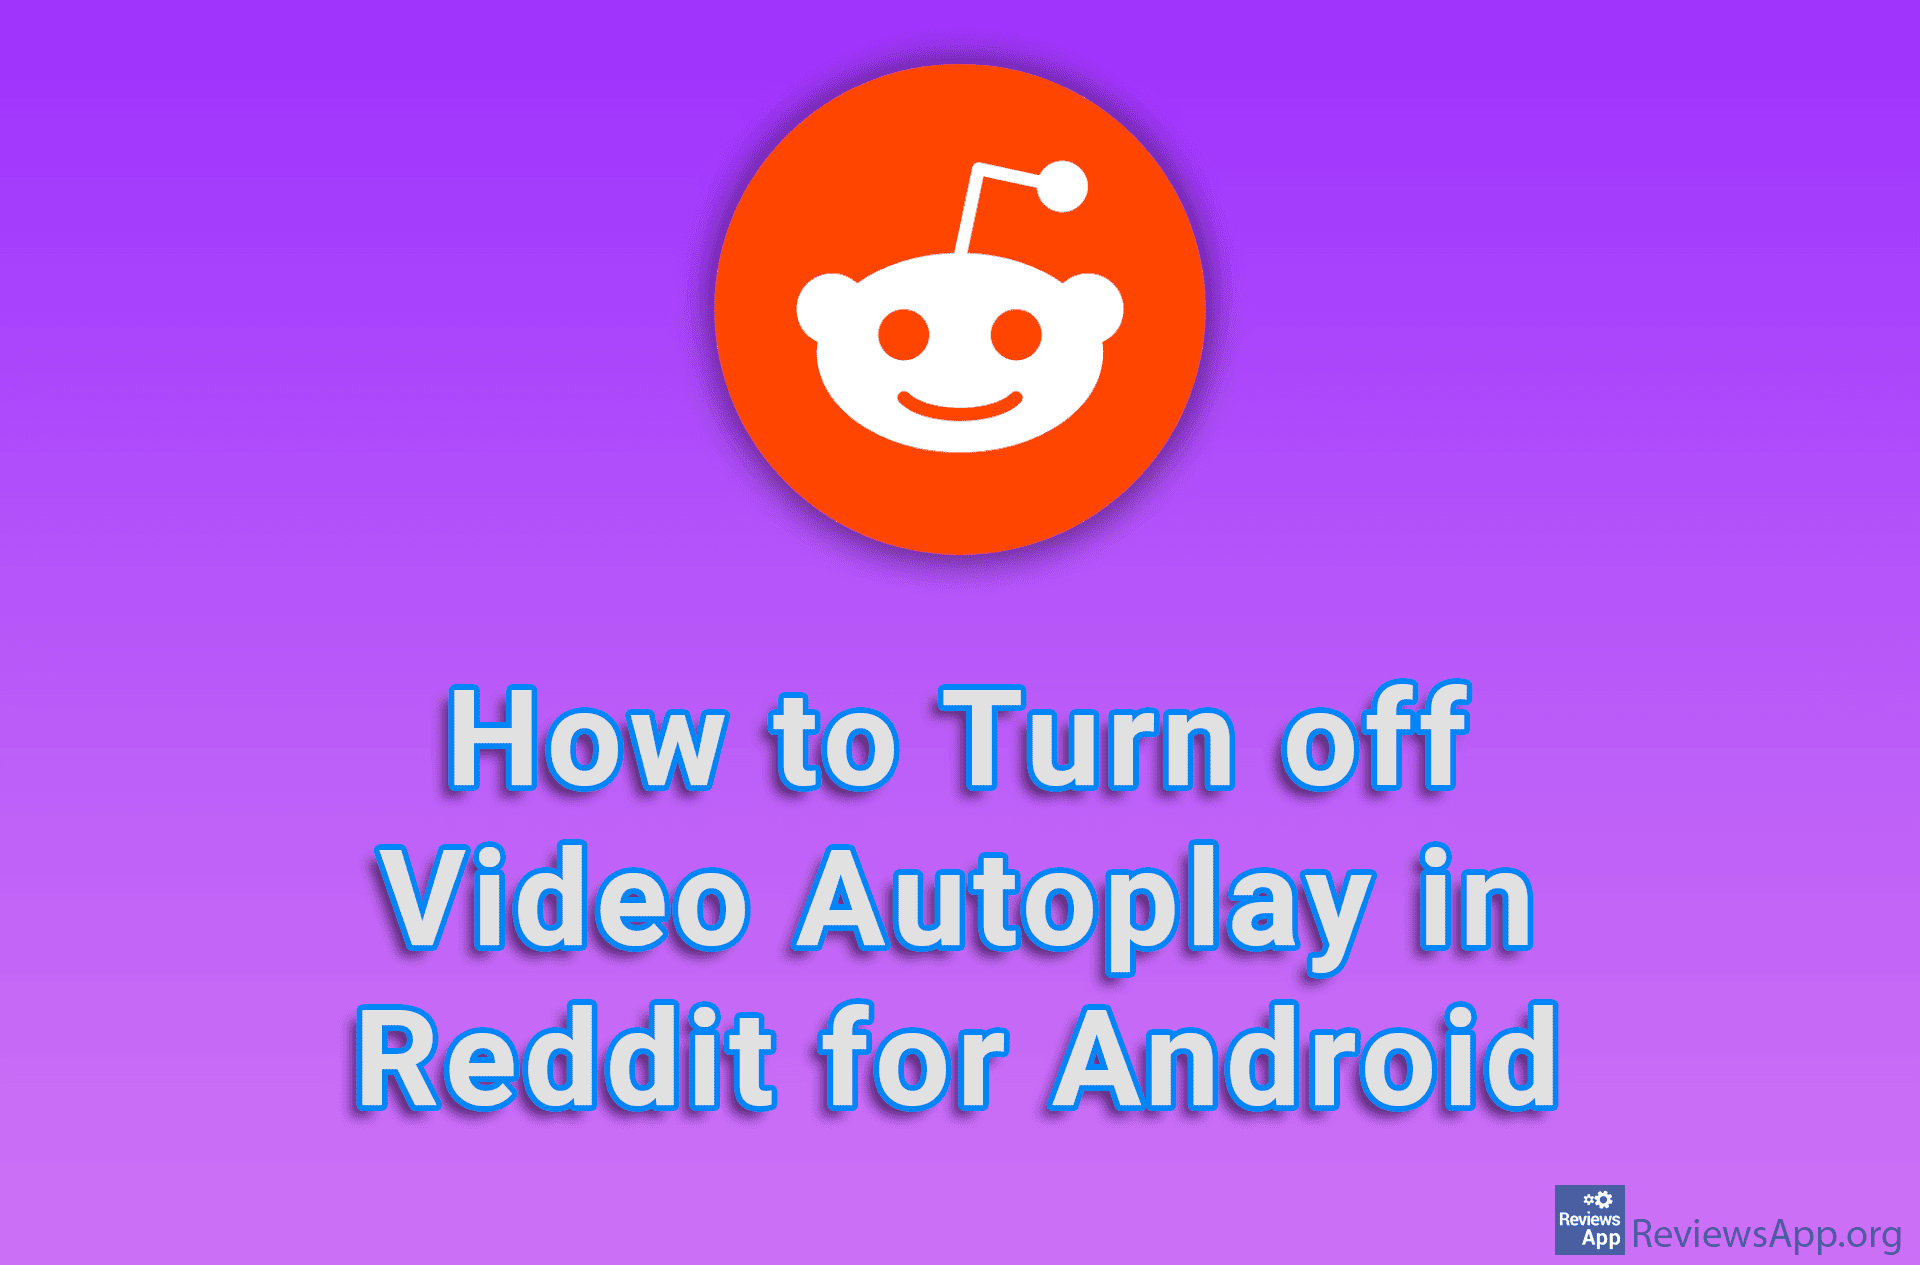 How to Turn off Video Autoplay in Reddit for Android